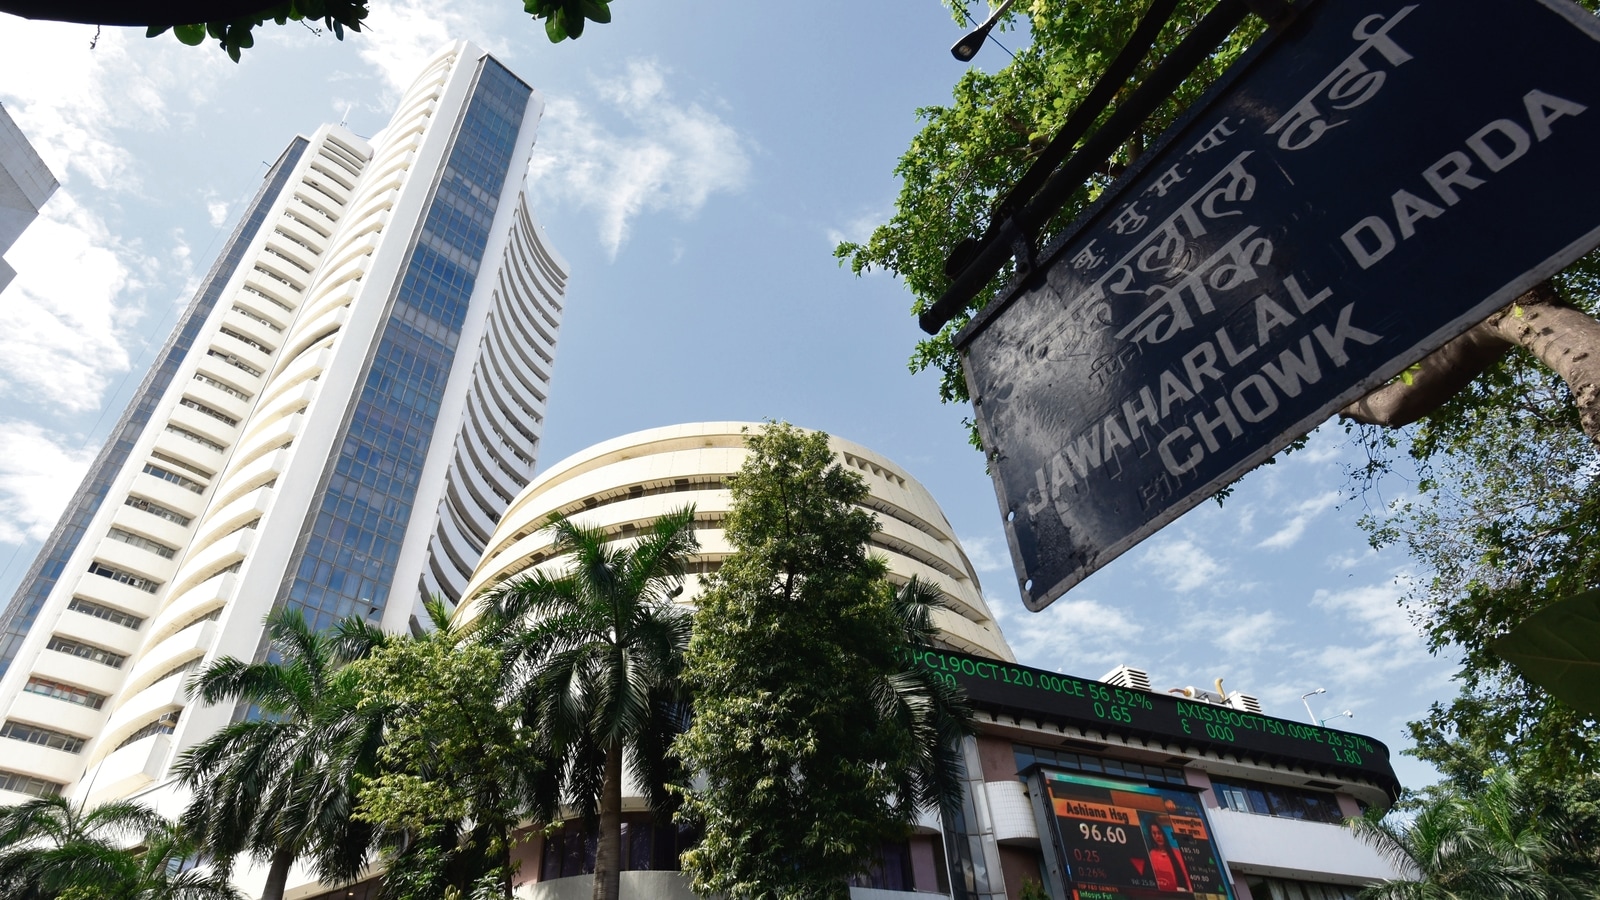 Sensex jumps 250 points to cross 58K in early trade; Nifty tops 17,300 -  Hindustan Times